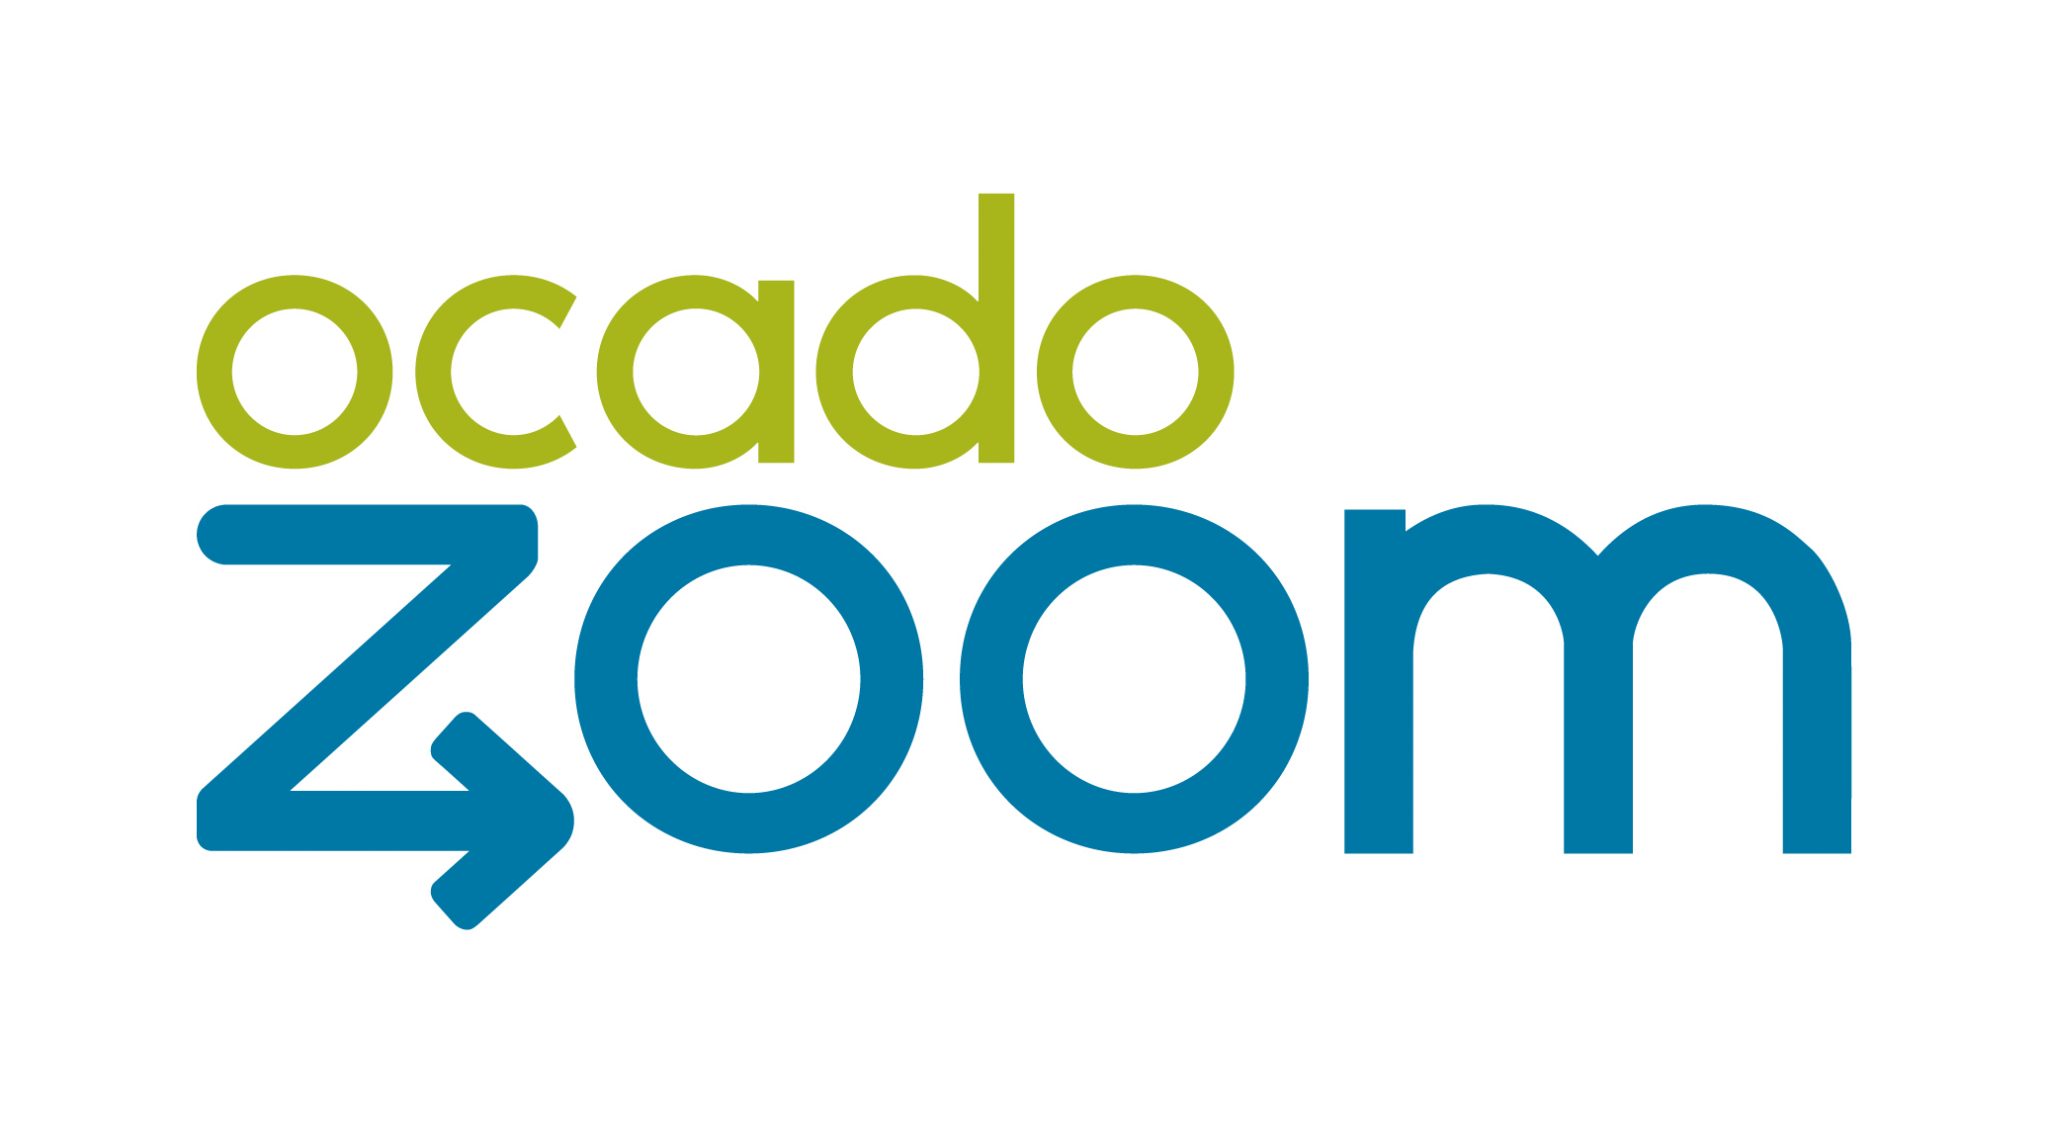 Ocado Zoom is trialling the use of electric assisted vehicles